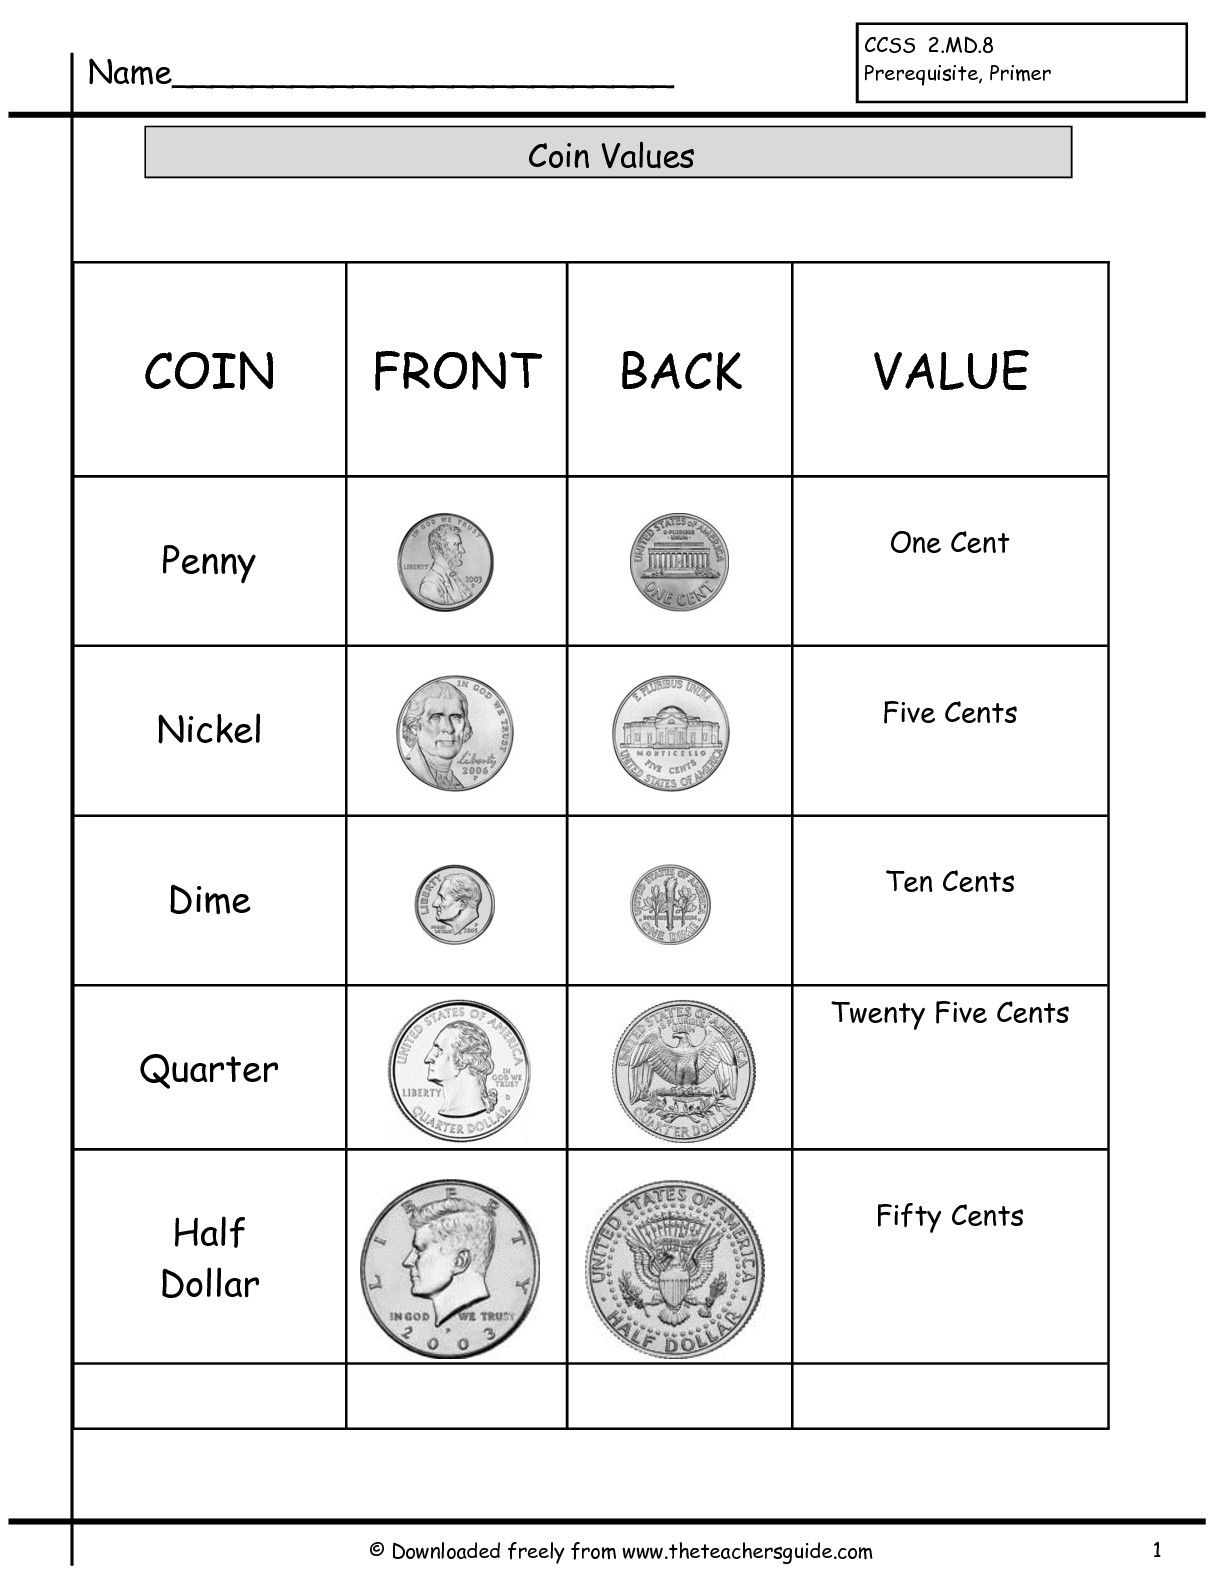 free-printable-coin-value-worksheets-free-printable-templates